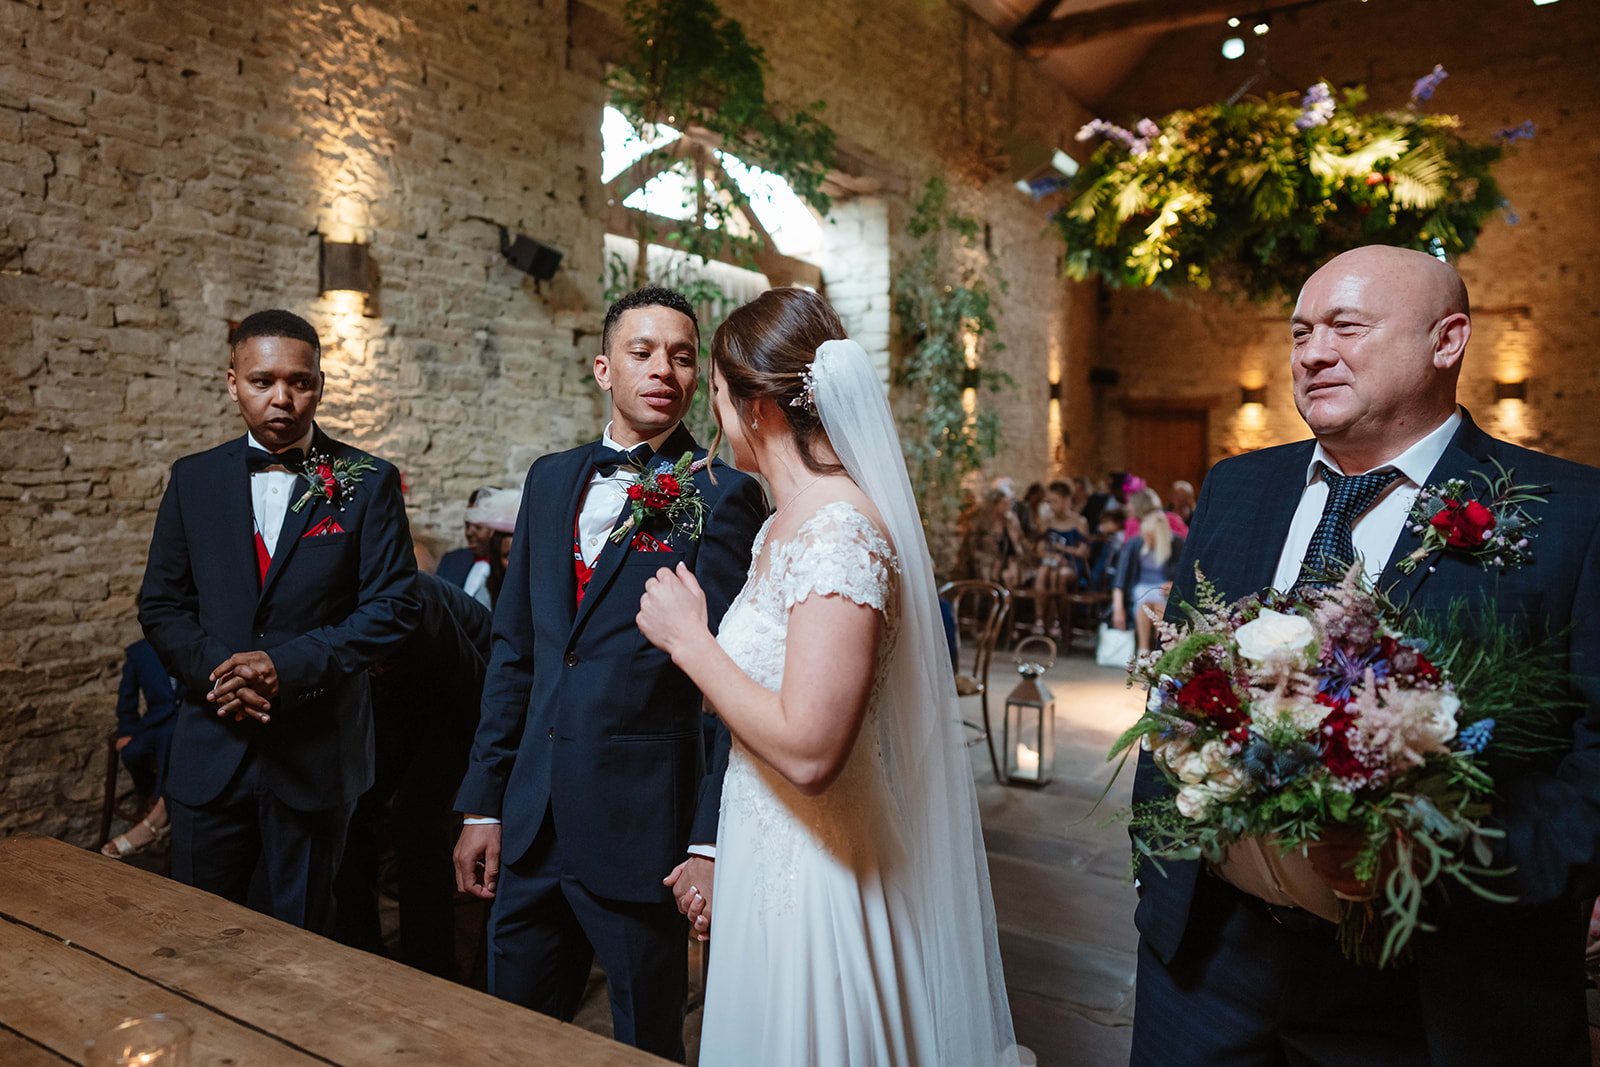 Groom and bride greet each other during ceremony at cripps barn